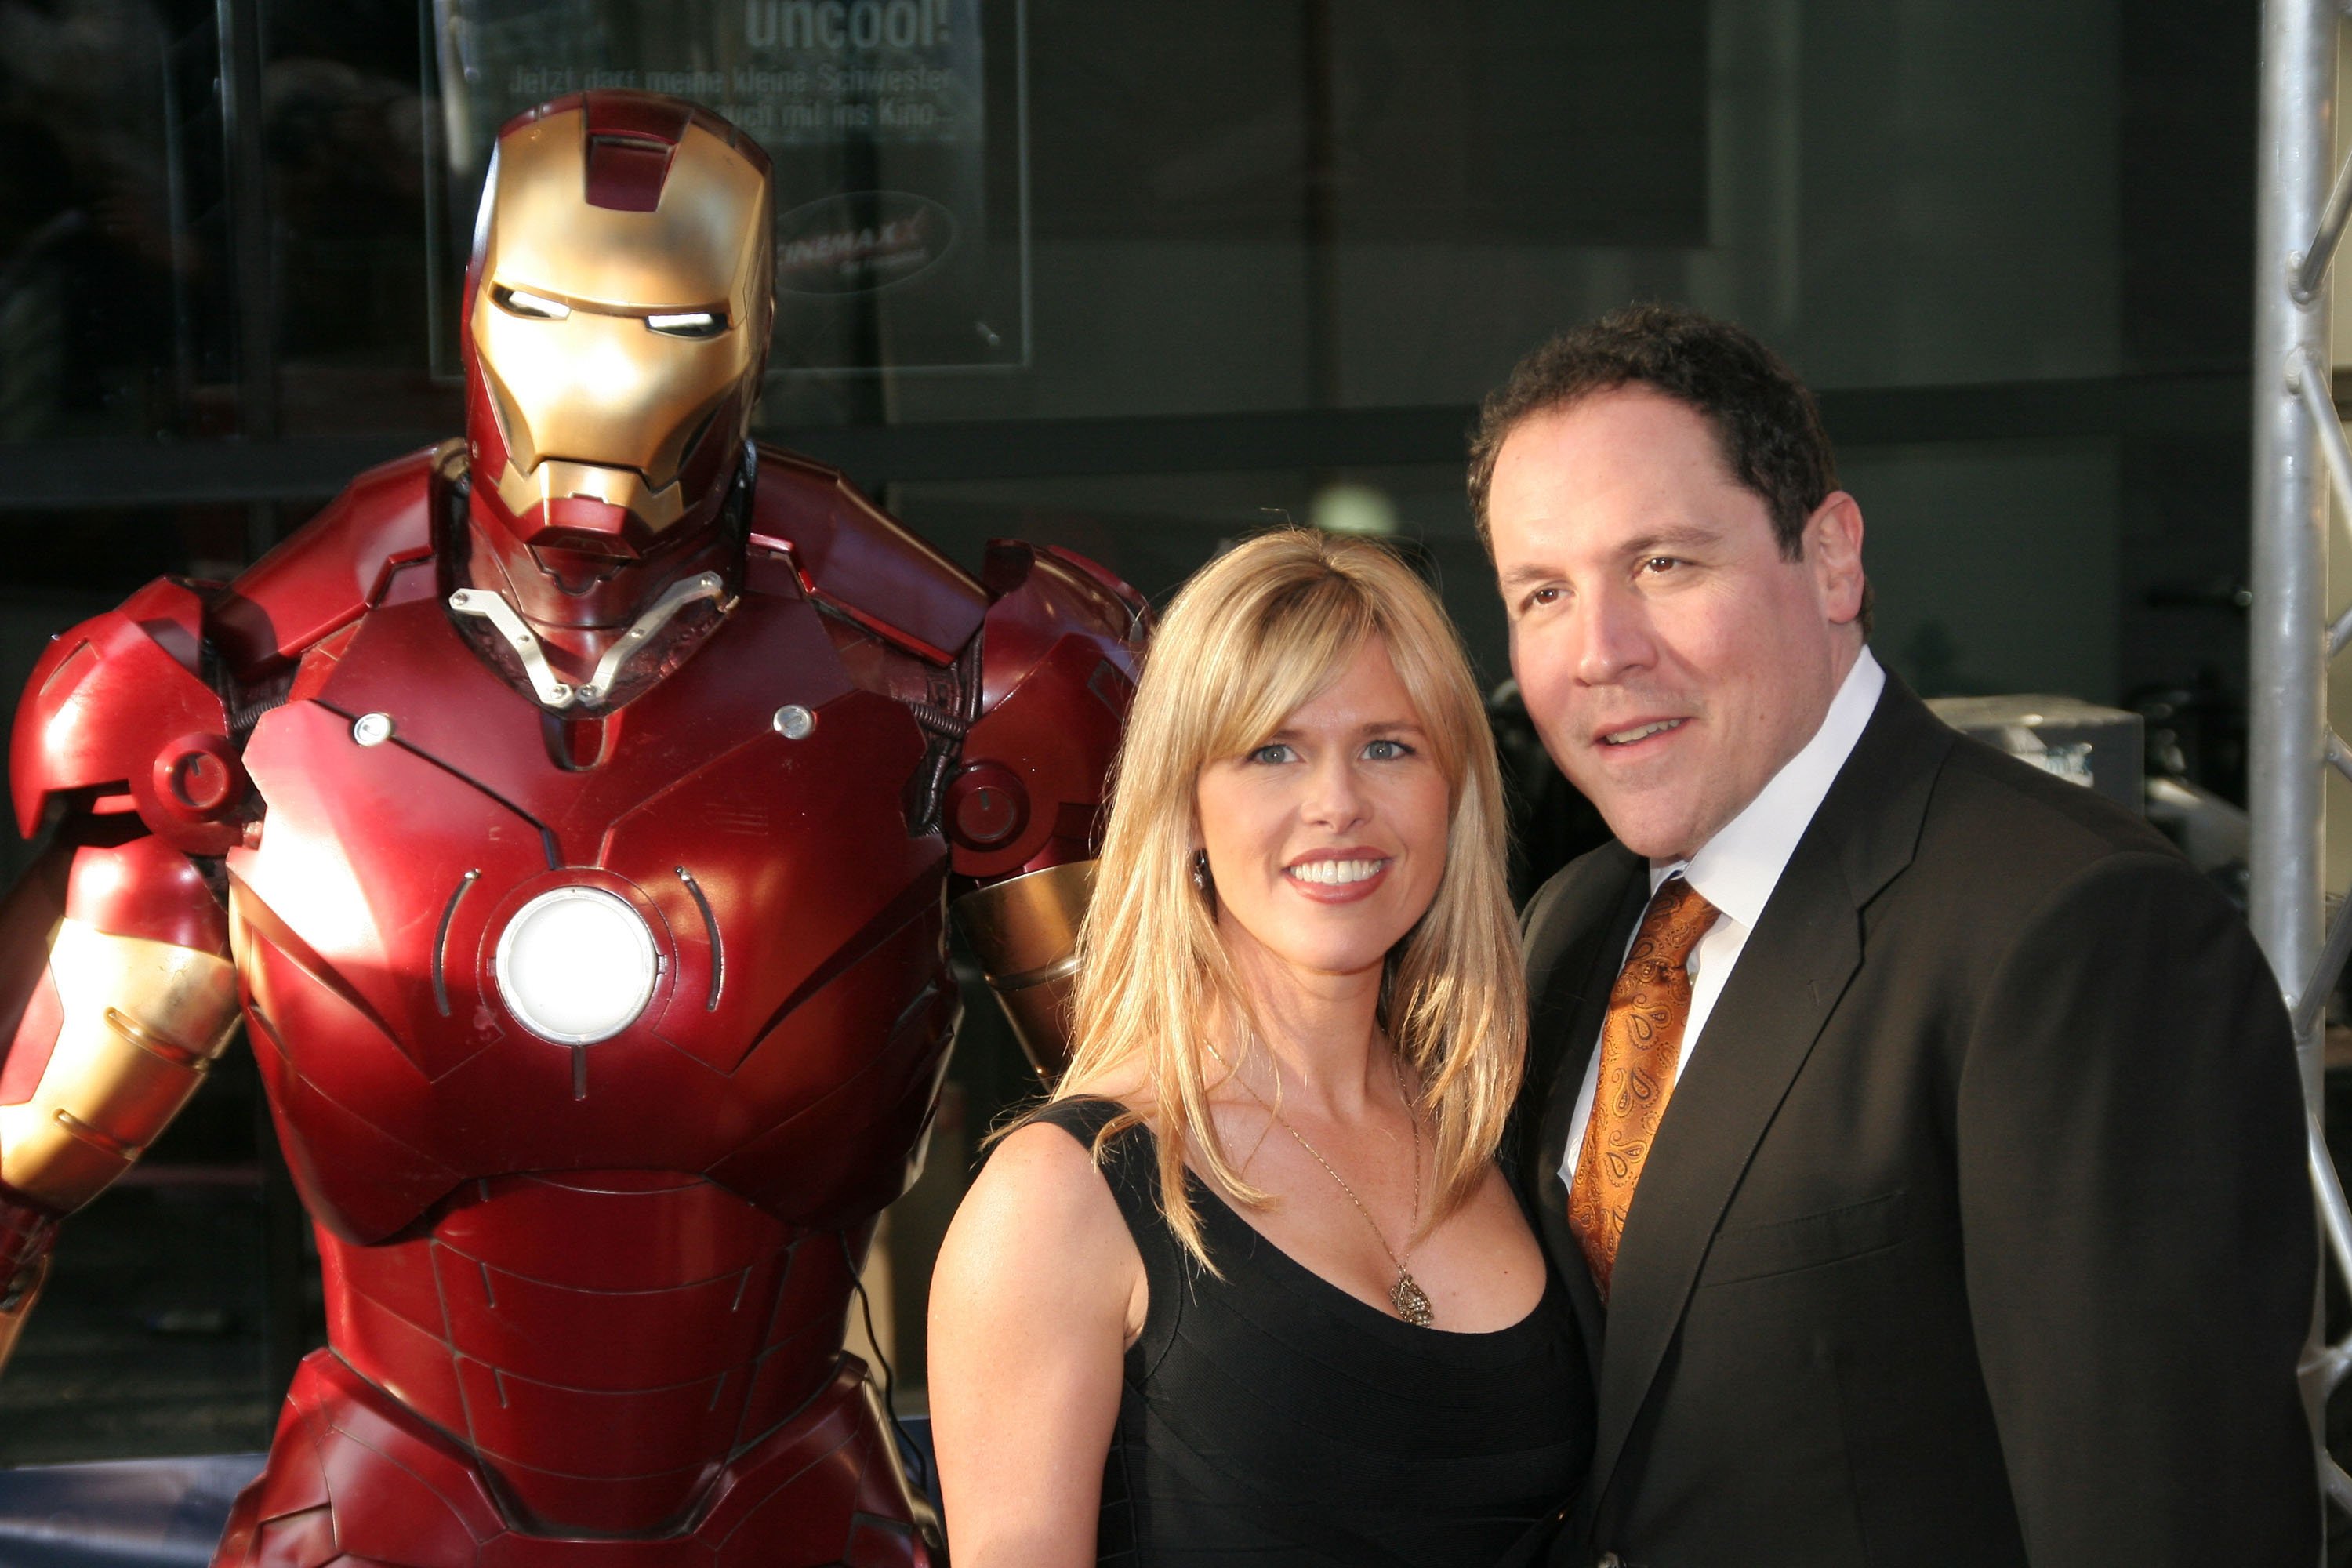 Jon Favreau and Joya Tillem attend the premiere of 'Iron Man' at the Cinemaxx  in Berlin, Germany on April 22, 2008 | Source: Getty Images